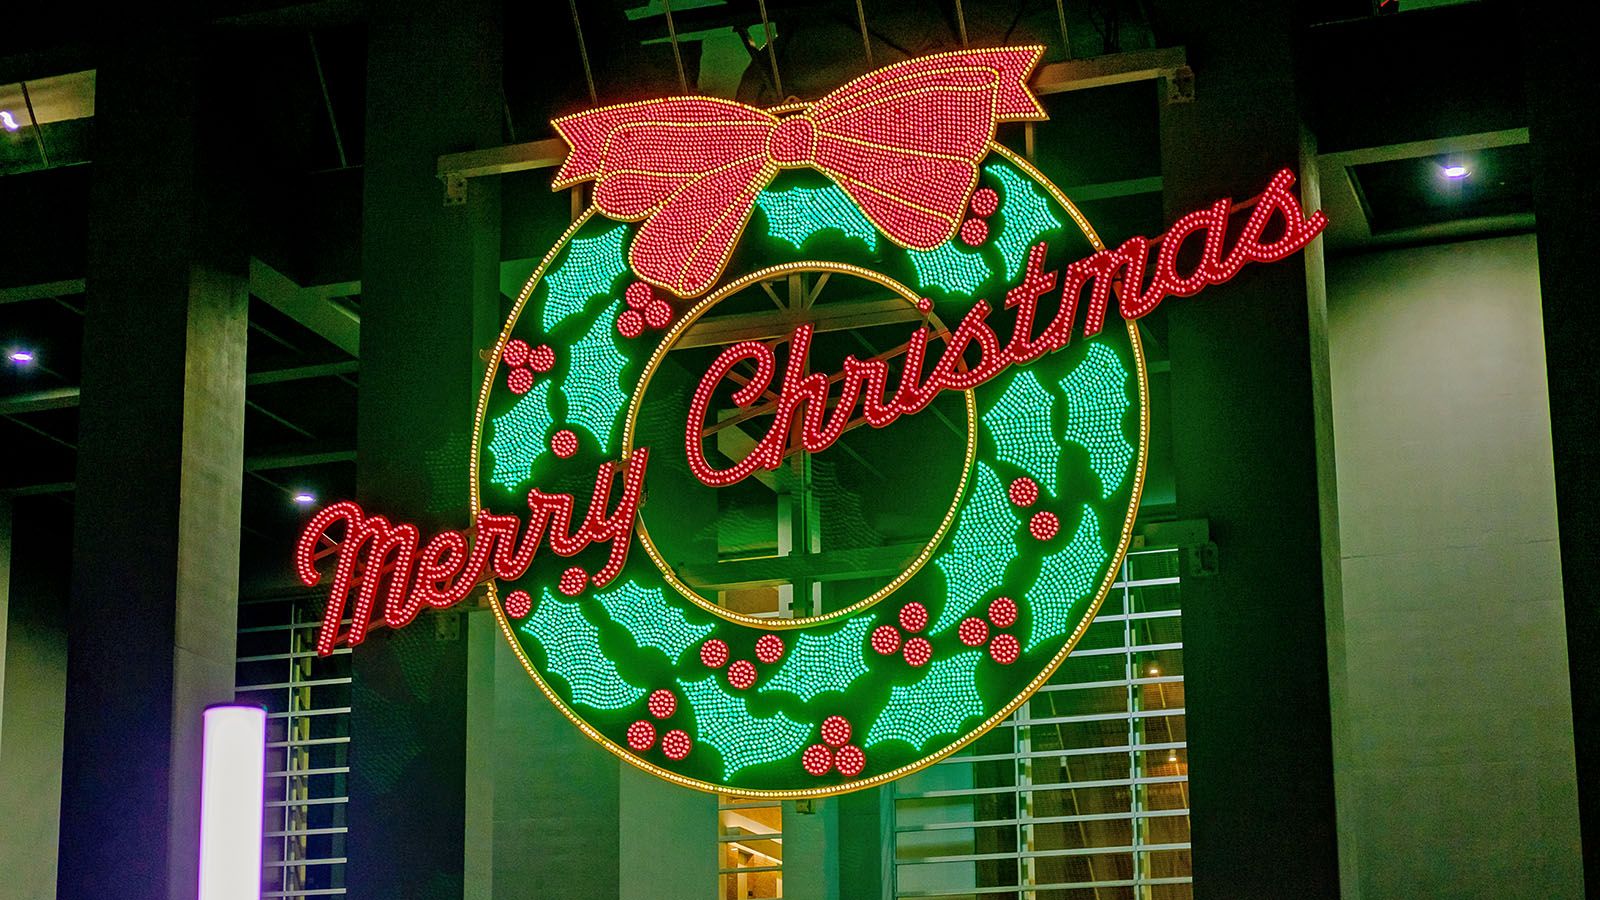 The Merry Christmas wreath at the I&M Building is among the many that will be lit during Night of Lights.